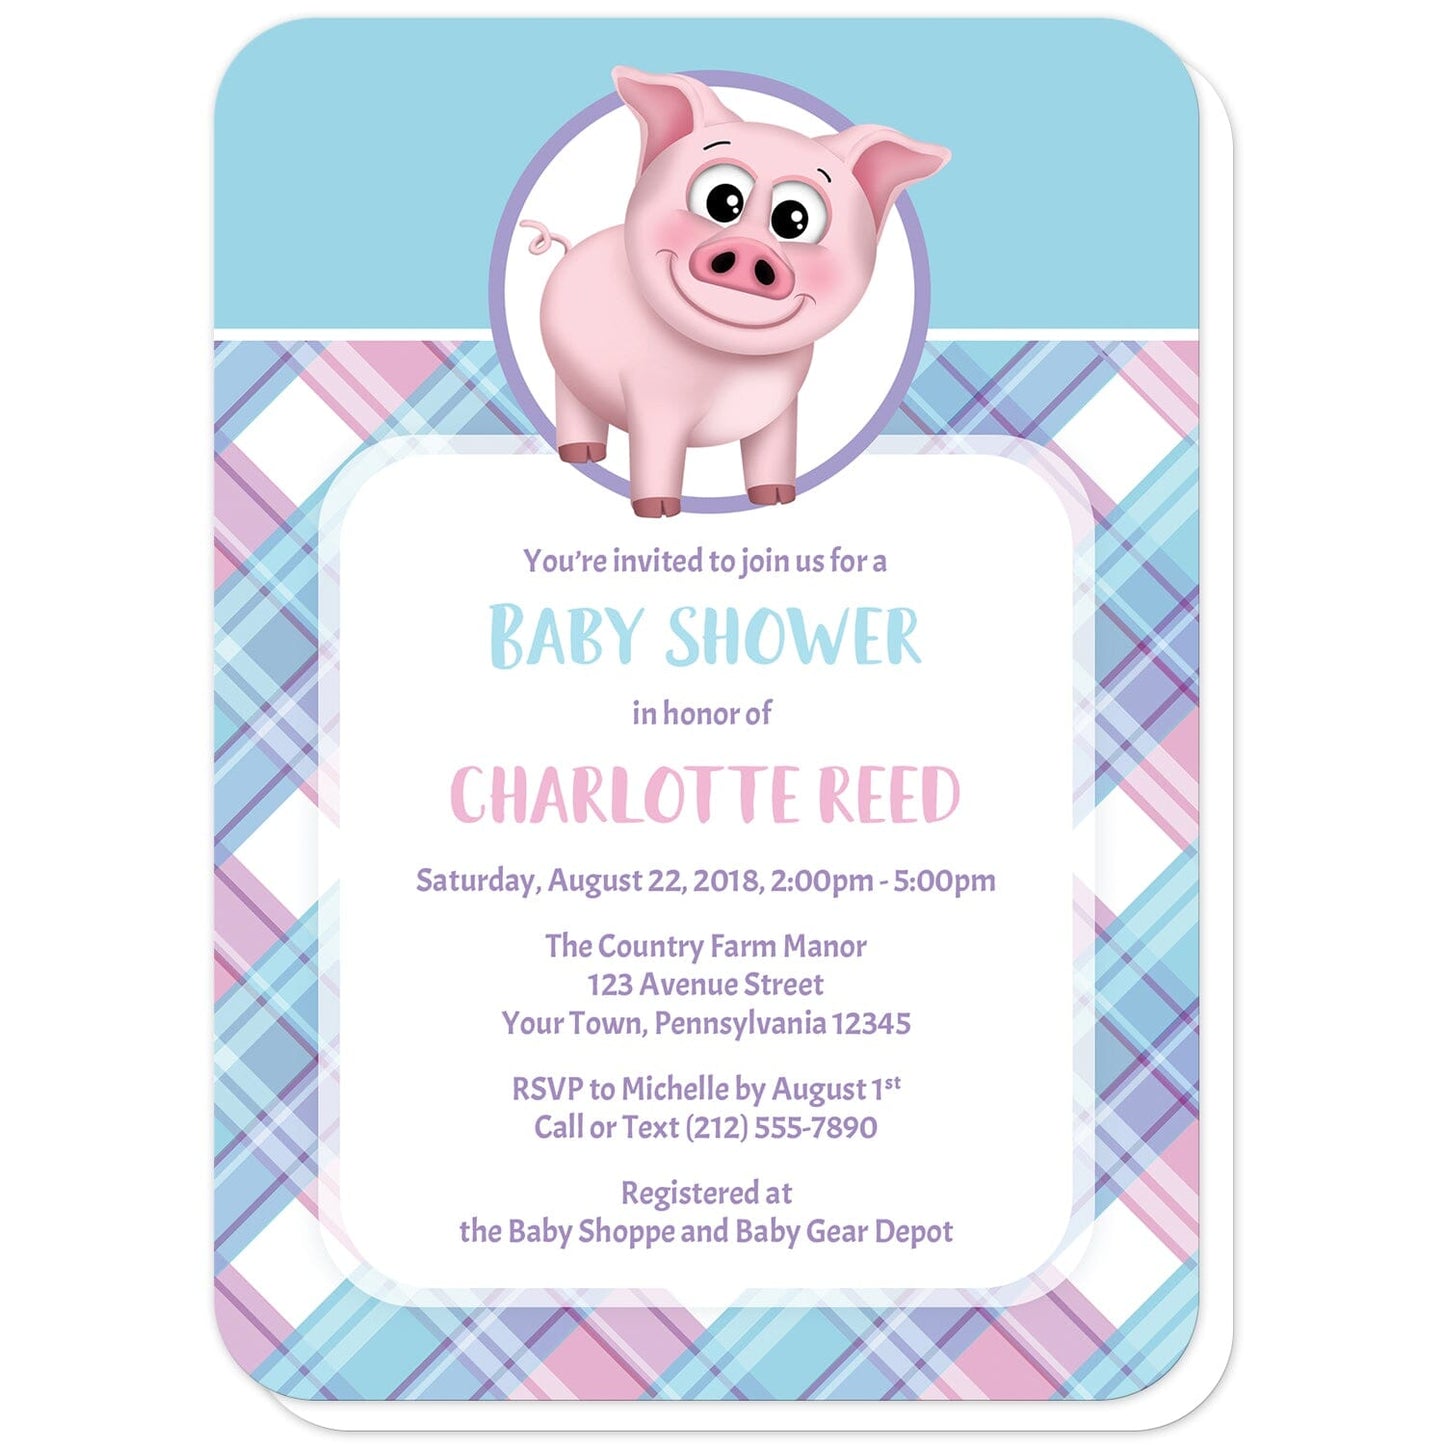 Happy Pig Pink Blue and Purple Plaid Baby Shower Invitations (with rounded corners) at Artistically Invited. Happy pig pink blue and purple plaid baby shower invitations that are illustrated with a cute and happy pink pig in a white and purple circle over a blue background along the top, and a pink, blue, and purple plaid pattern background on the bottom. Your personalized baby shower celebration details are custom printed in pink, blue and purple over a white rectangular area over the plaid pattern.